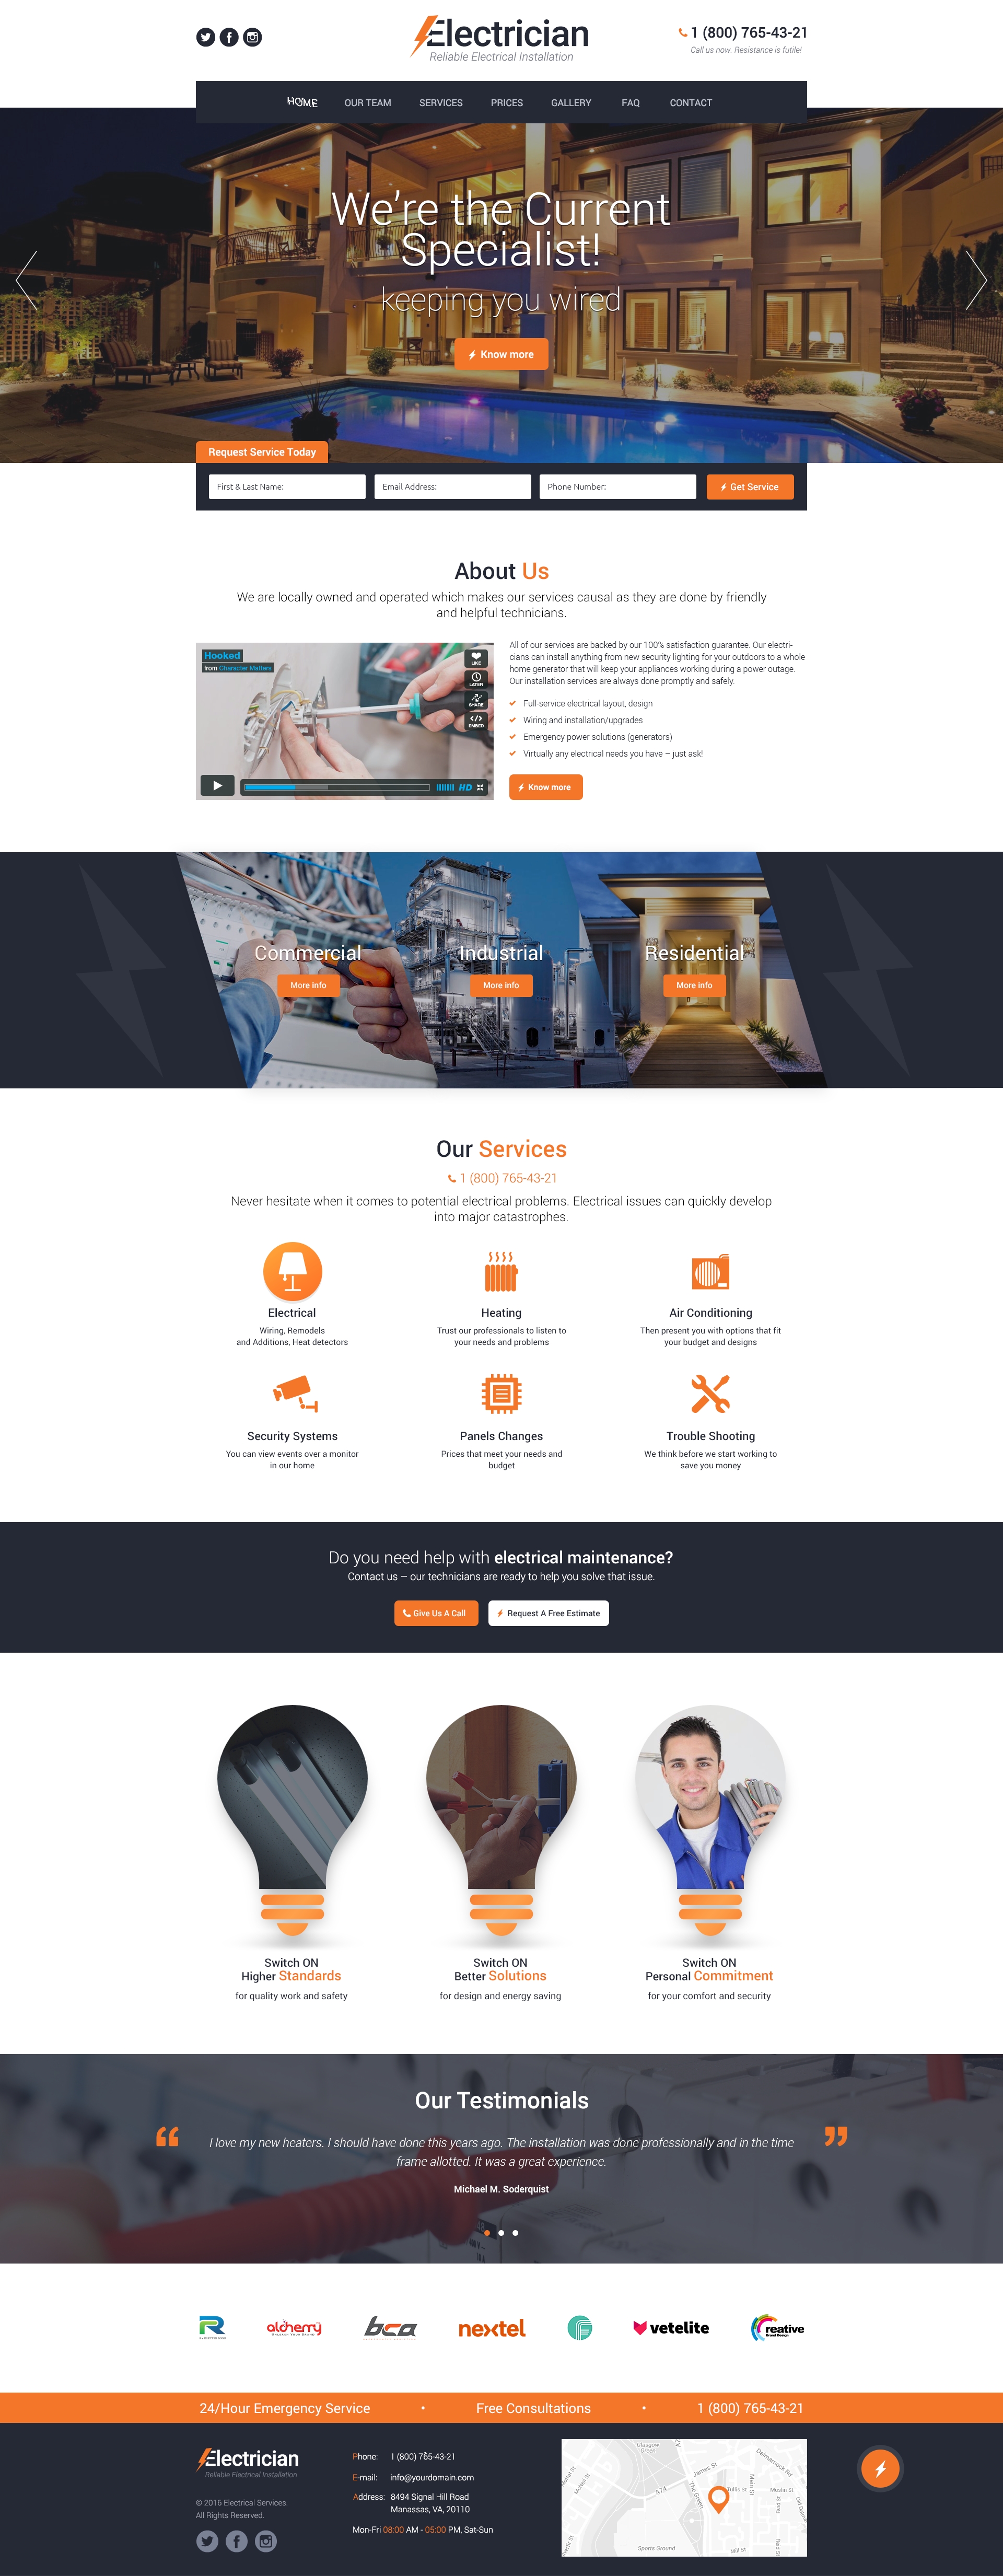 Home Page preview for Electrician Services free PSD website template